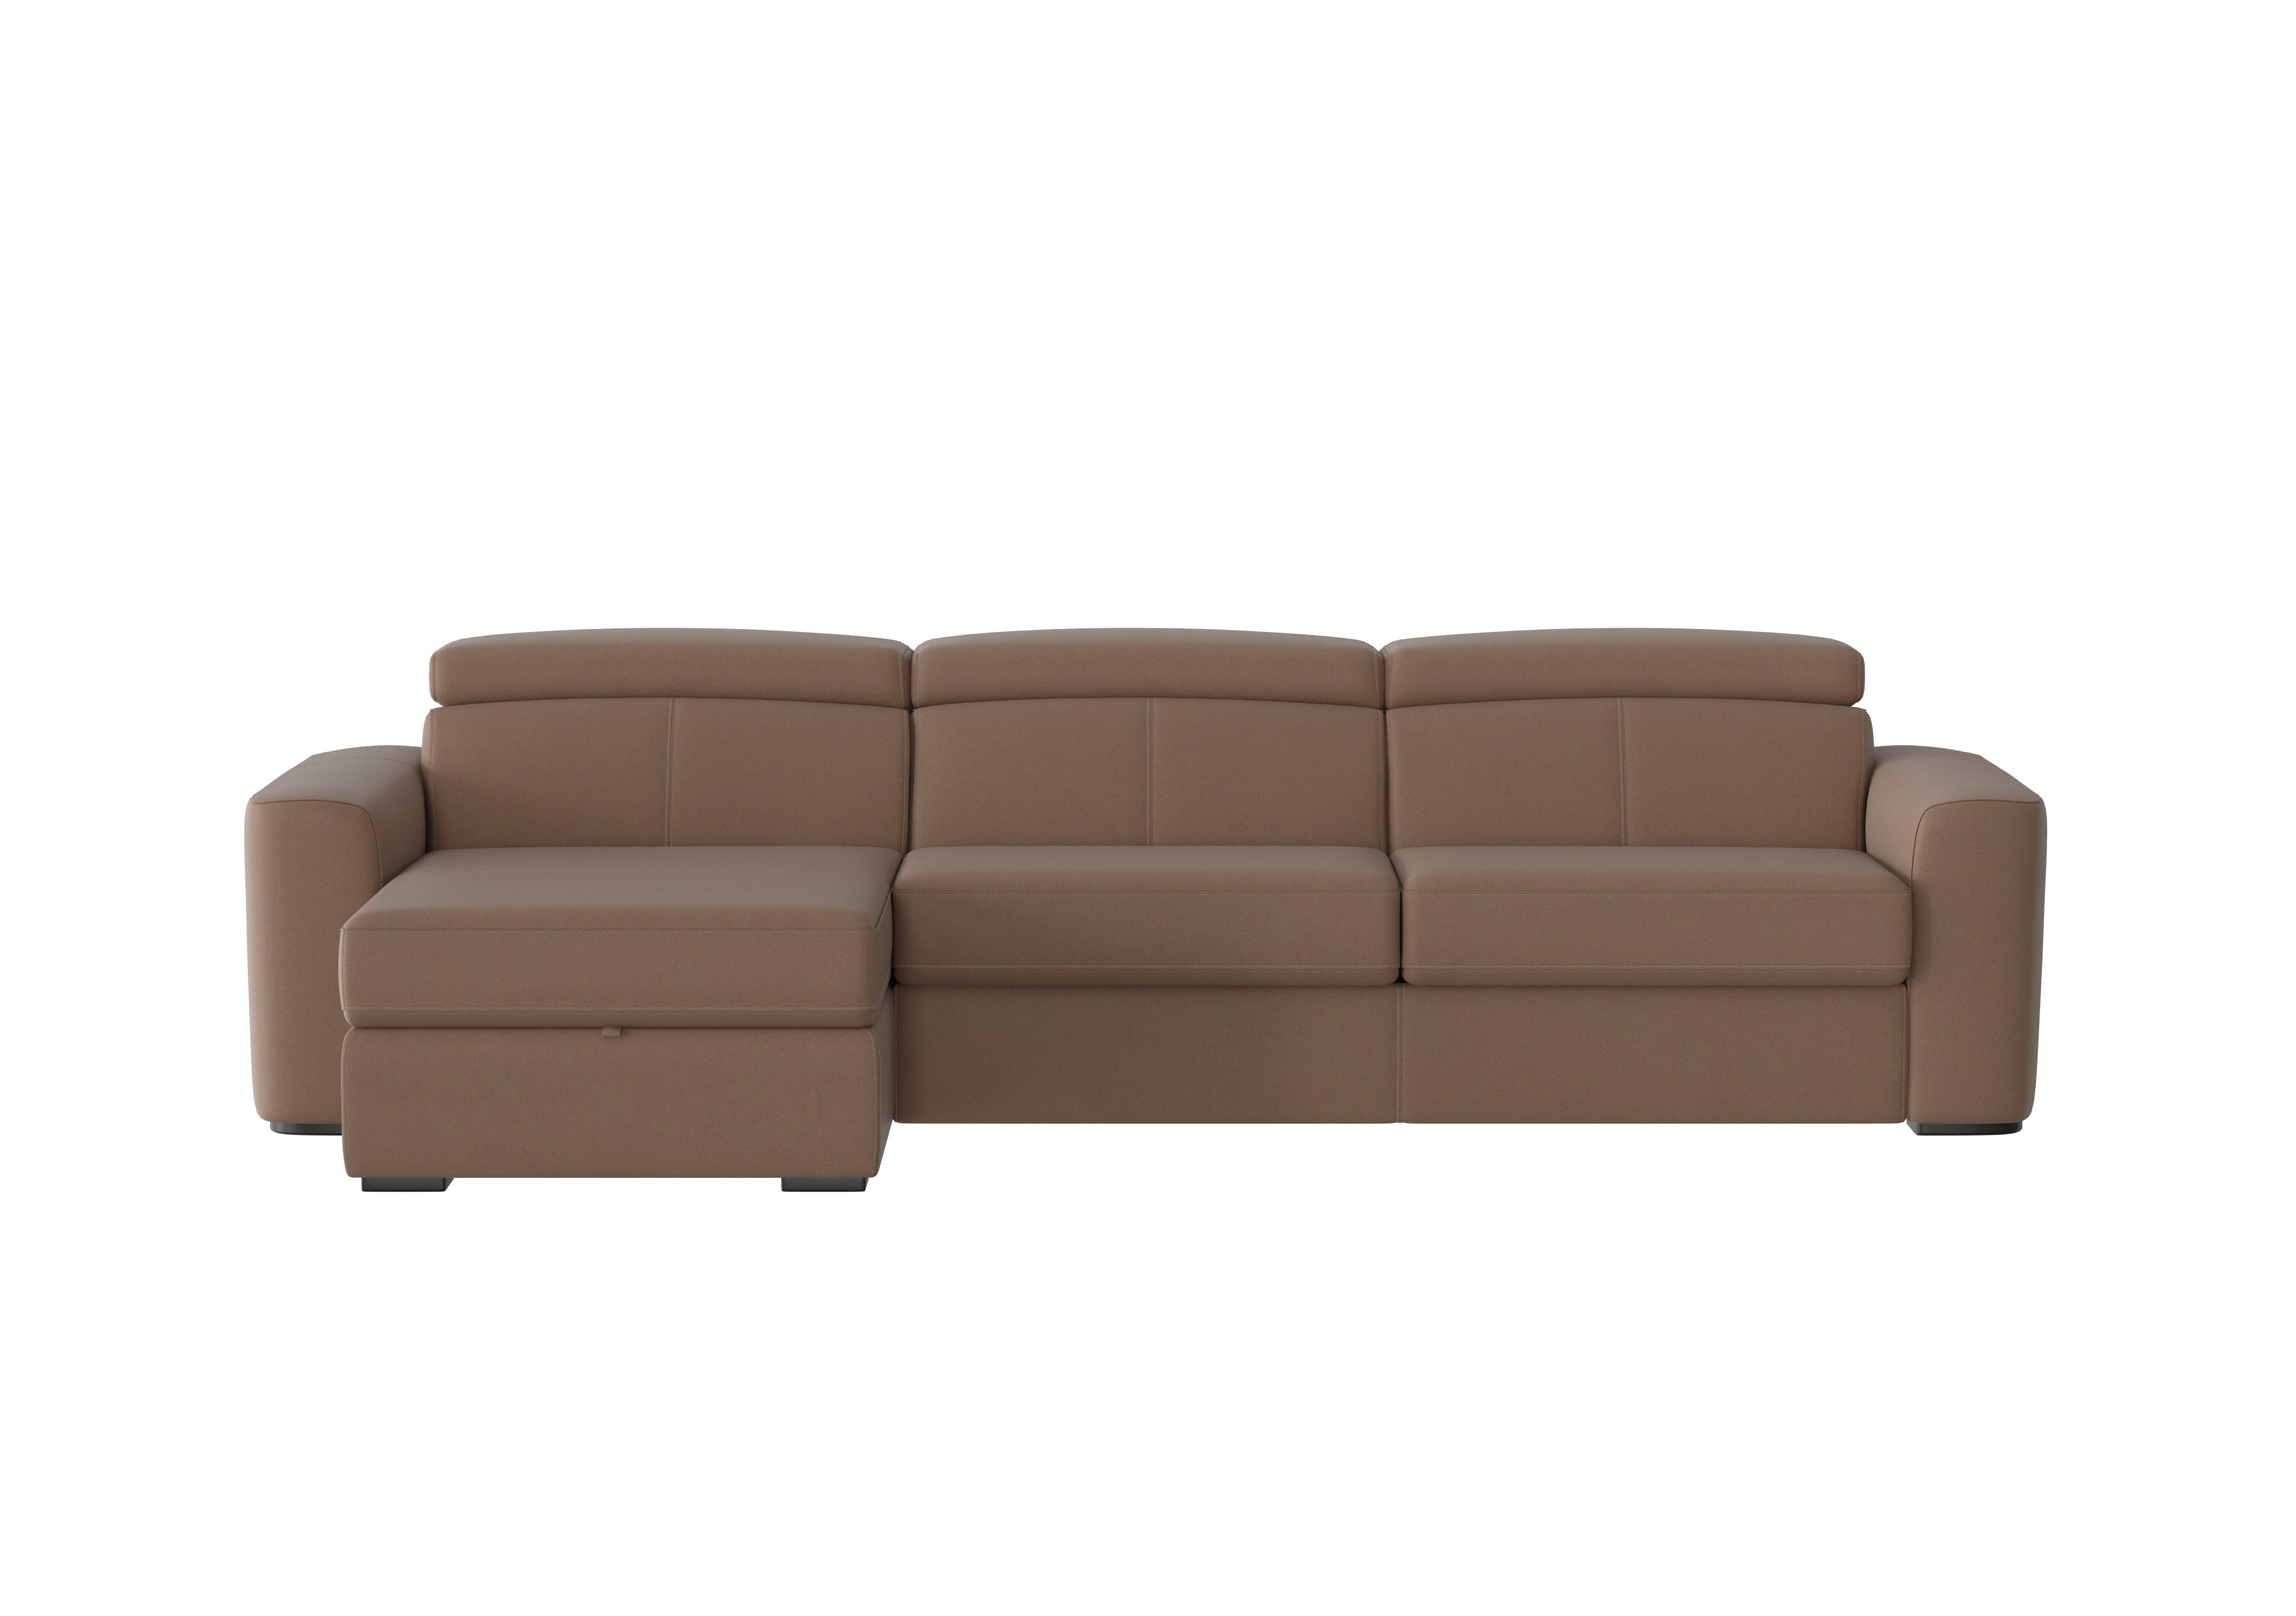 Infinity Fabric Corner Chaise Sofa Bed with Storage in Bfa-Blj-R04 Tobacco on Furniture Village